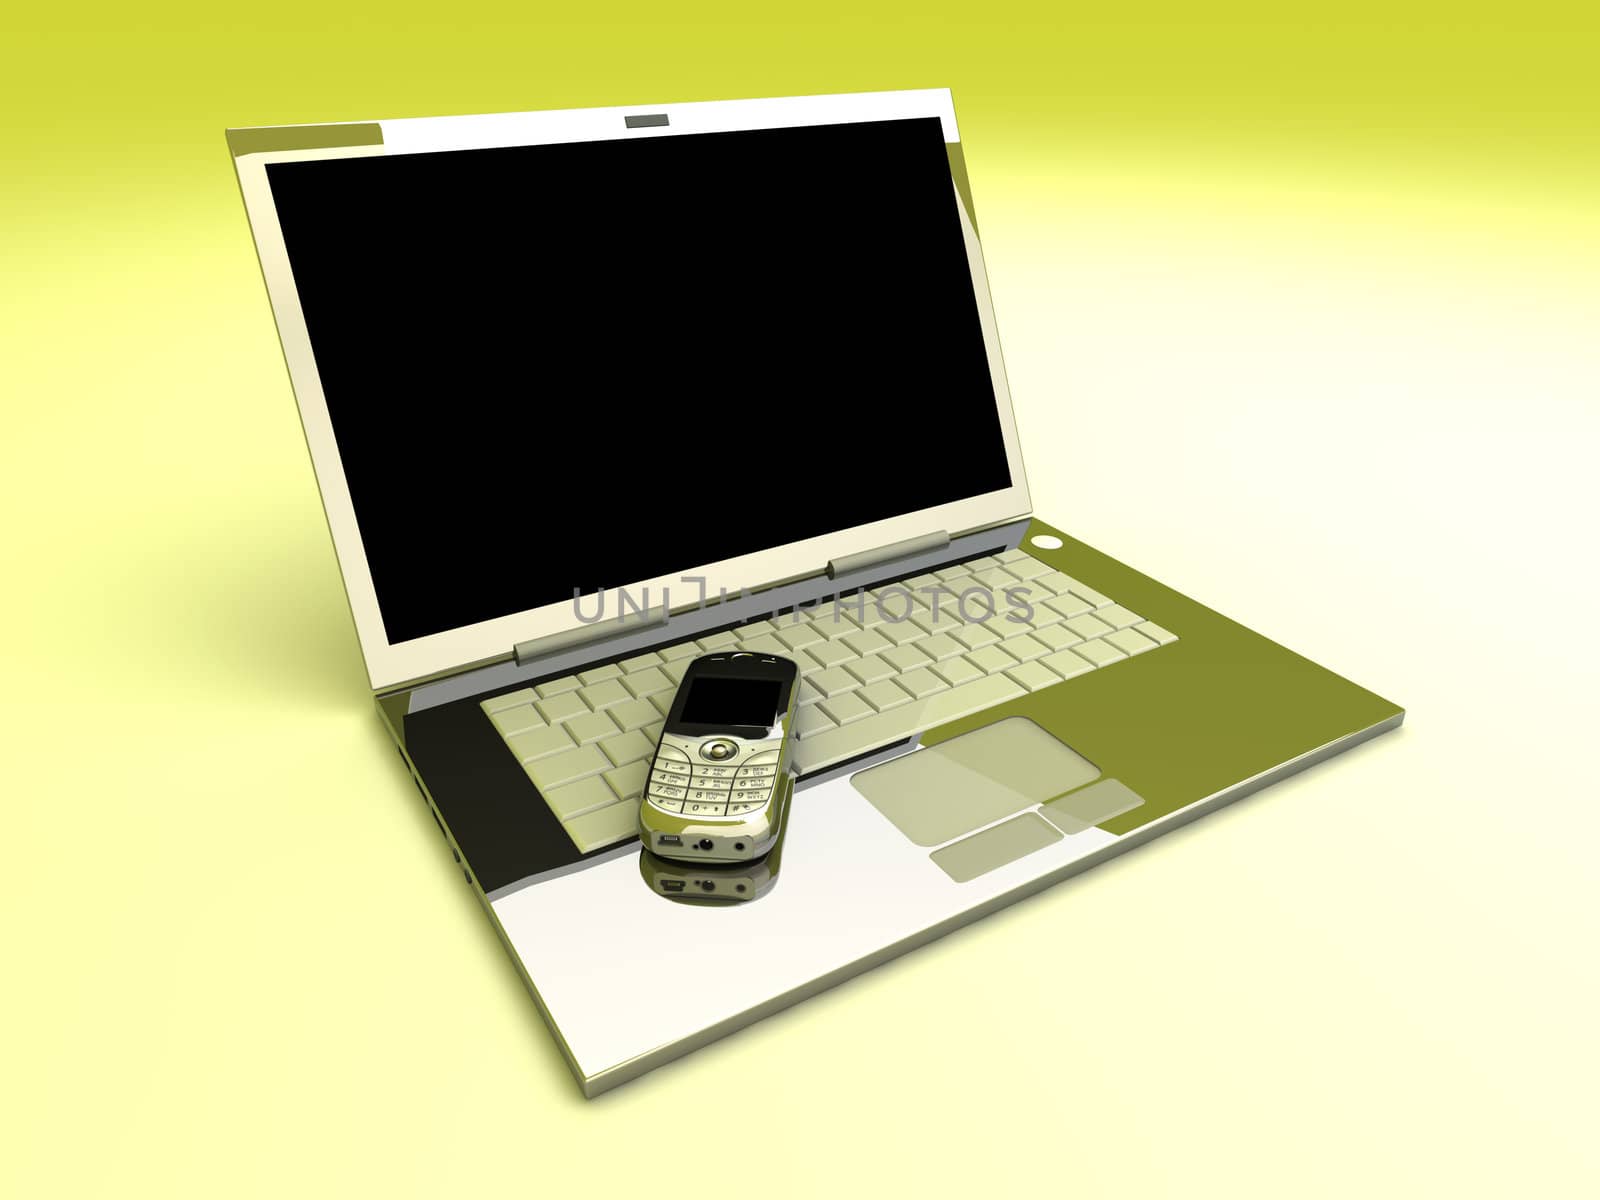 A cell phone and a Laptop. Mobile communication technology. 3D rendered Illustration.